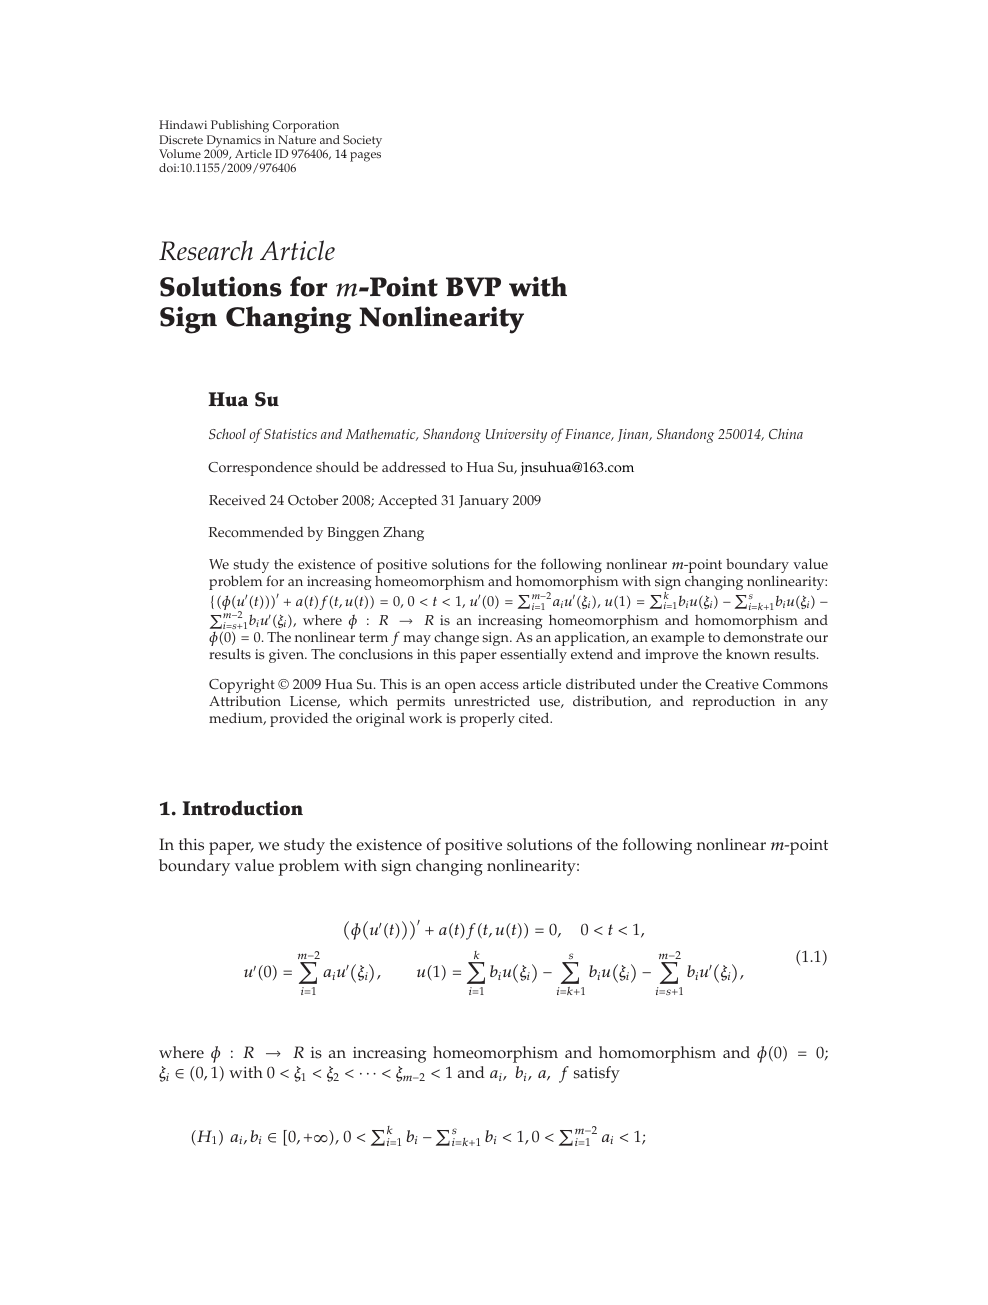 Solutions For M Point Bvp With Sign Changing Nonlinearity Topic Of Research Paper In Mathematics Download Scholarly Article Pdf And Read For Free On Cyberleninka Open Science Hub